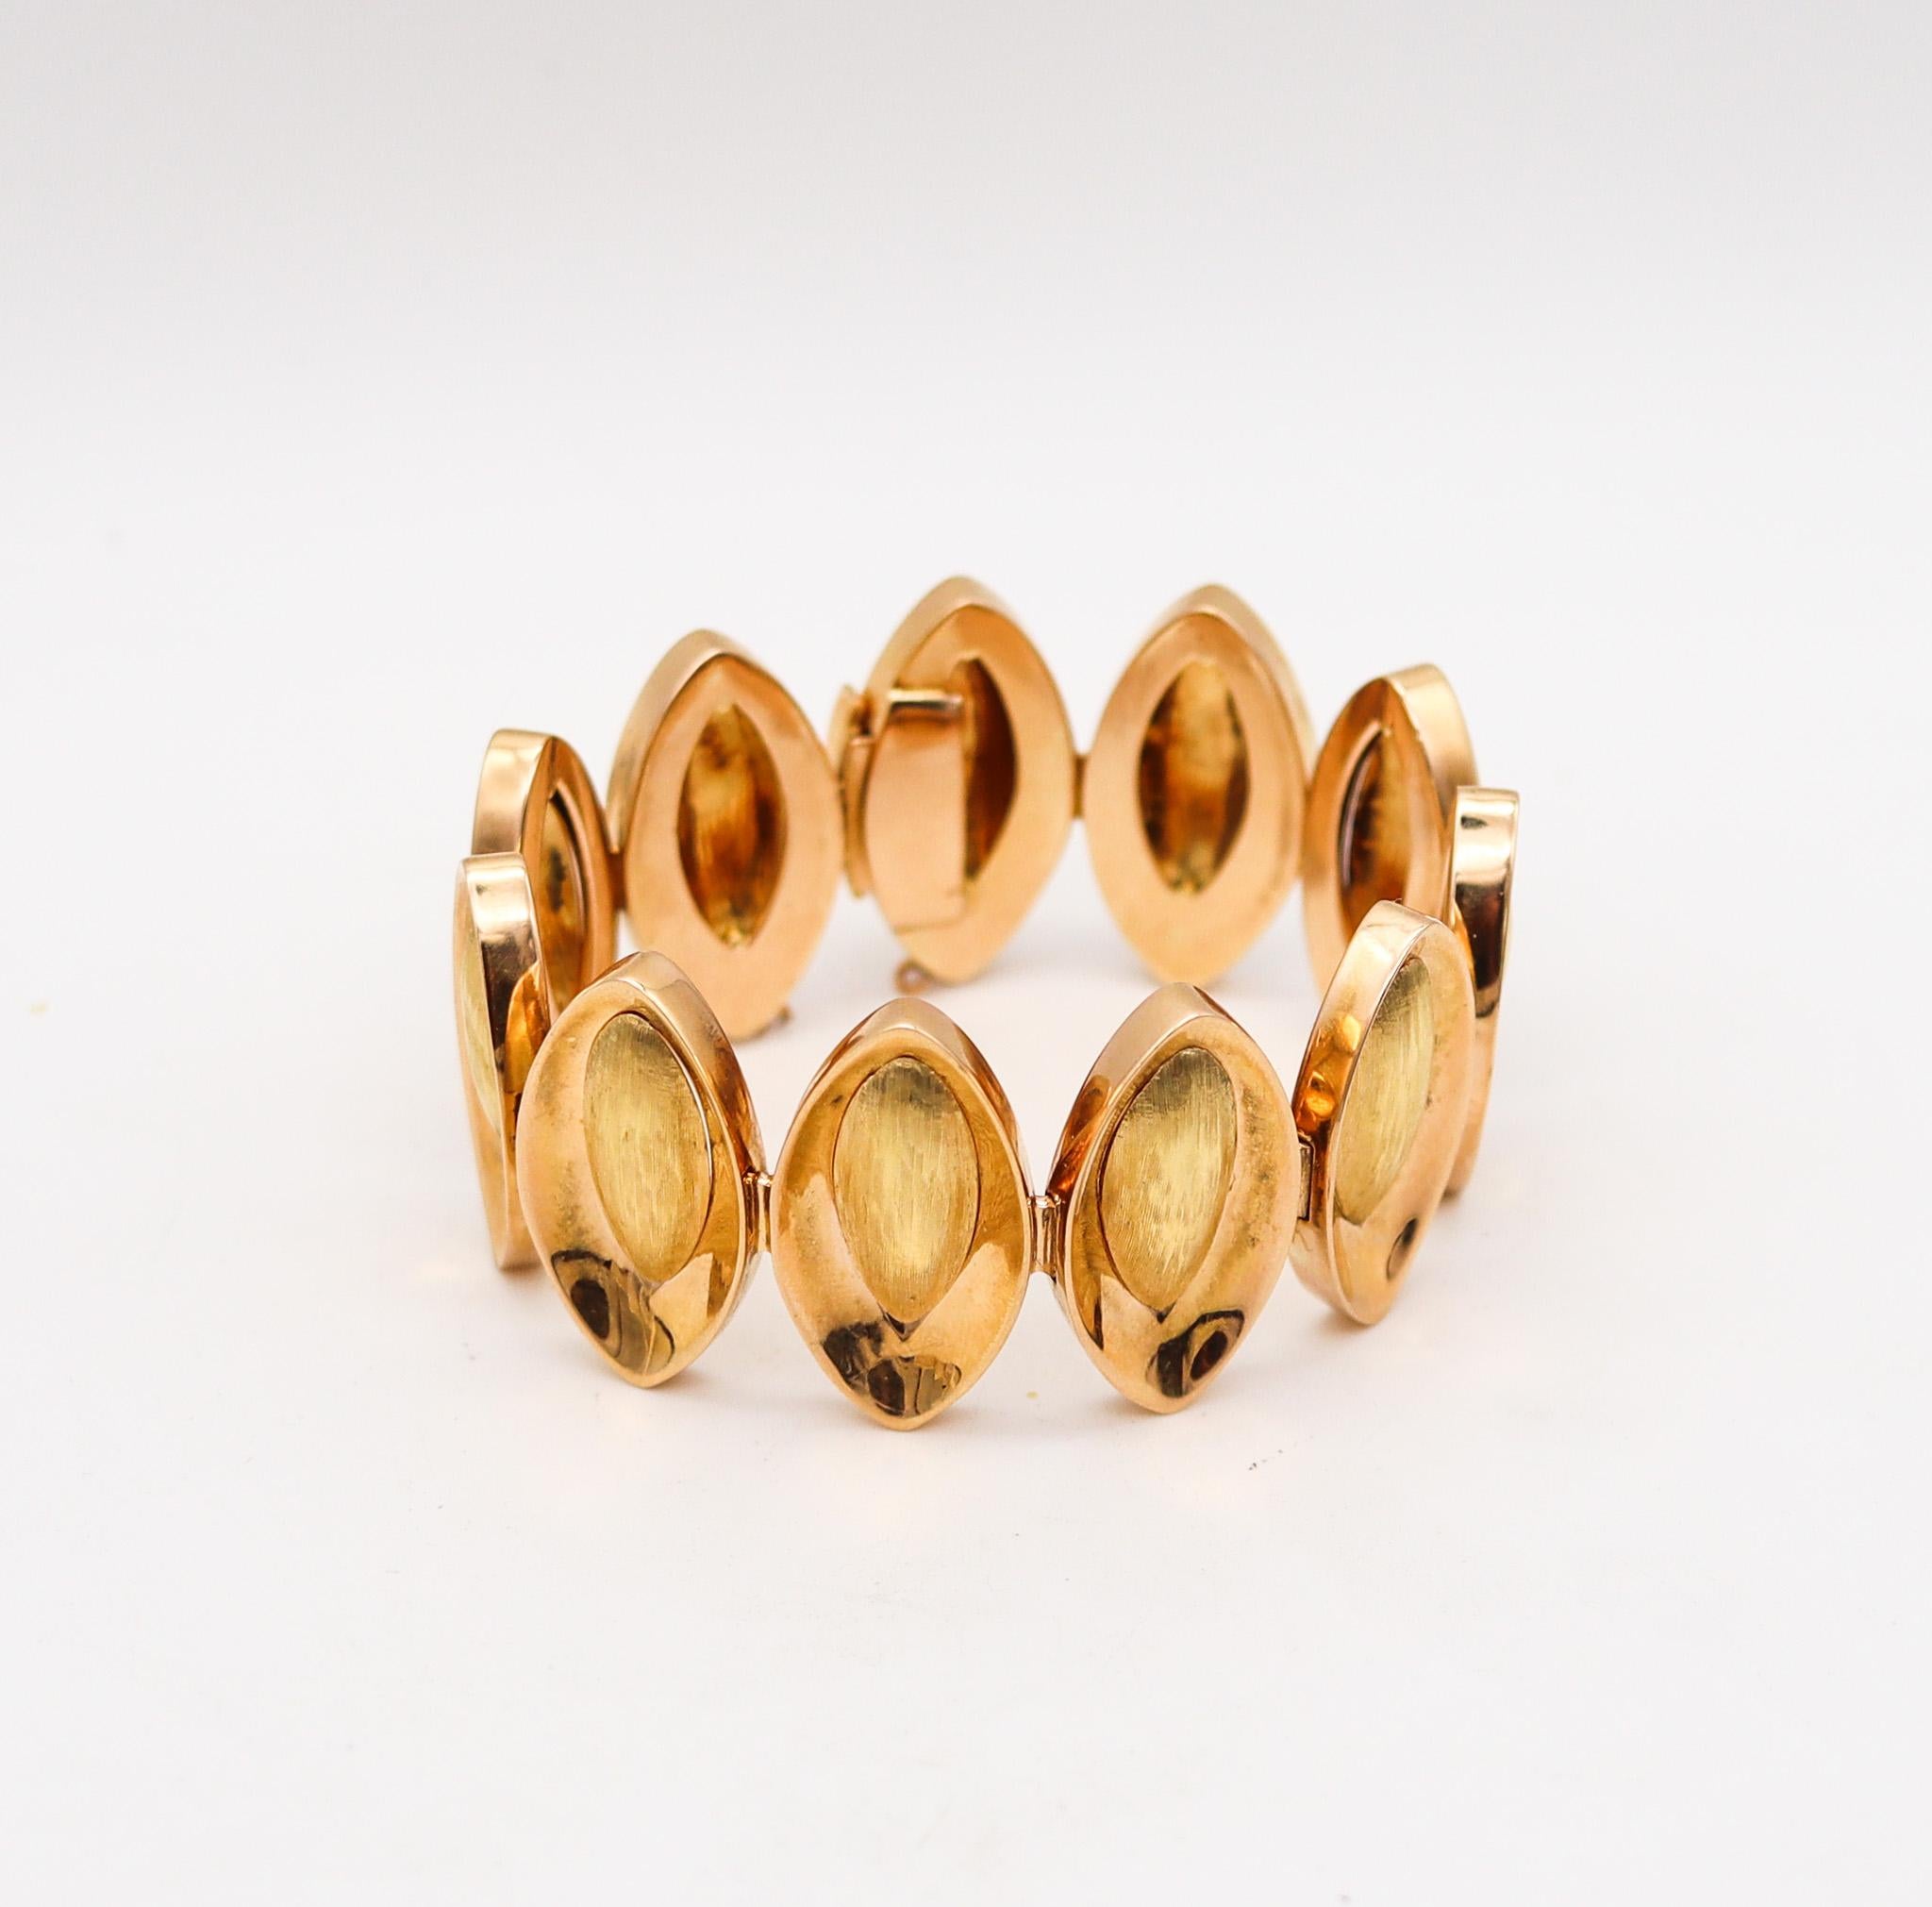 Post-war geometric bracelet made in Verona.

Fabulous mid-century bold bracelet, created in Verona Italy during the post-war period, back in the 1950. This statement bracelet has been crafted in solid yellow gold of 18 karats with polished finish